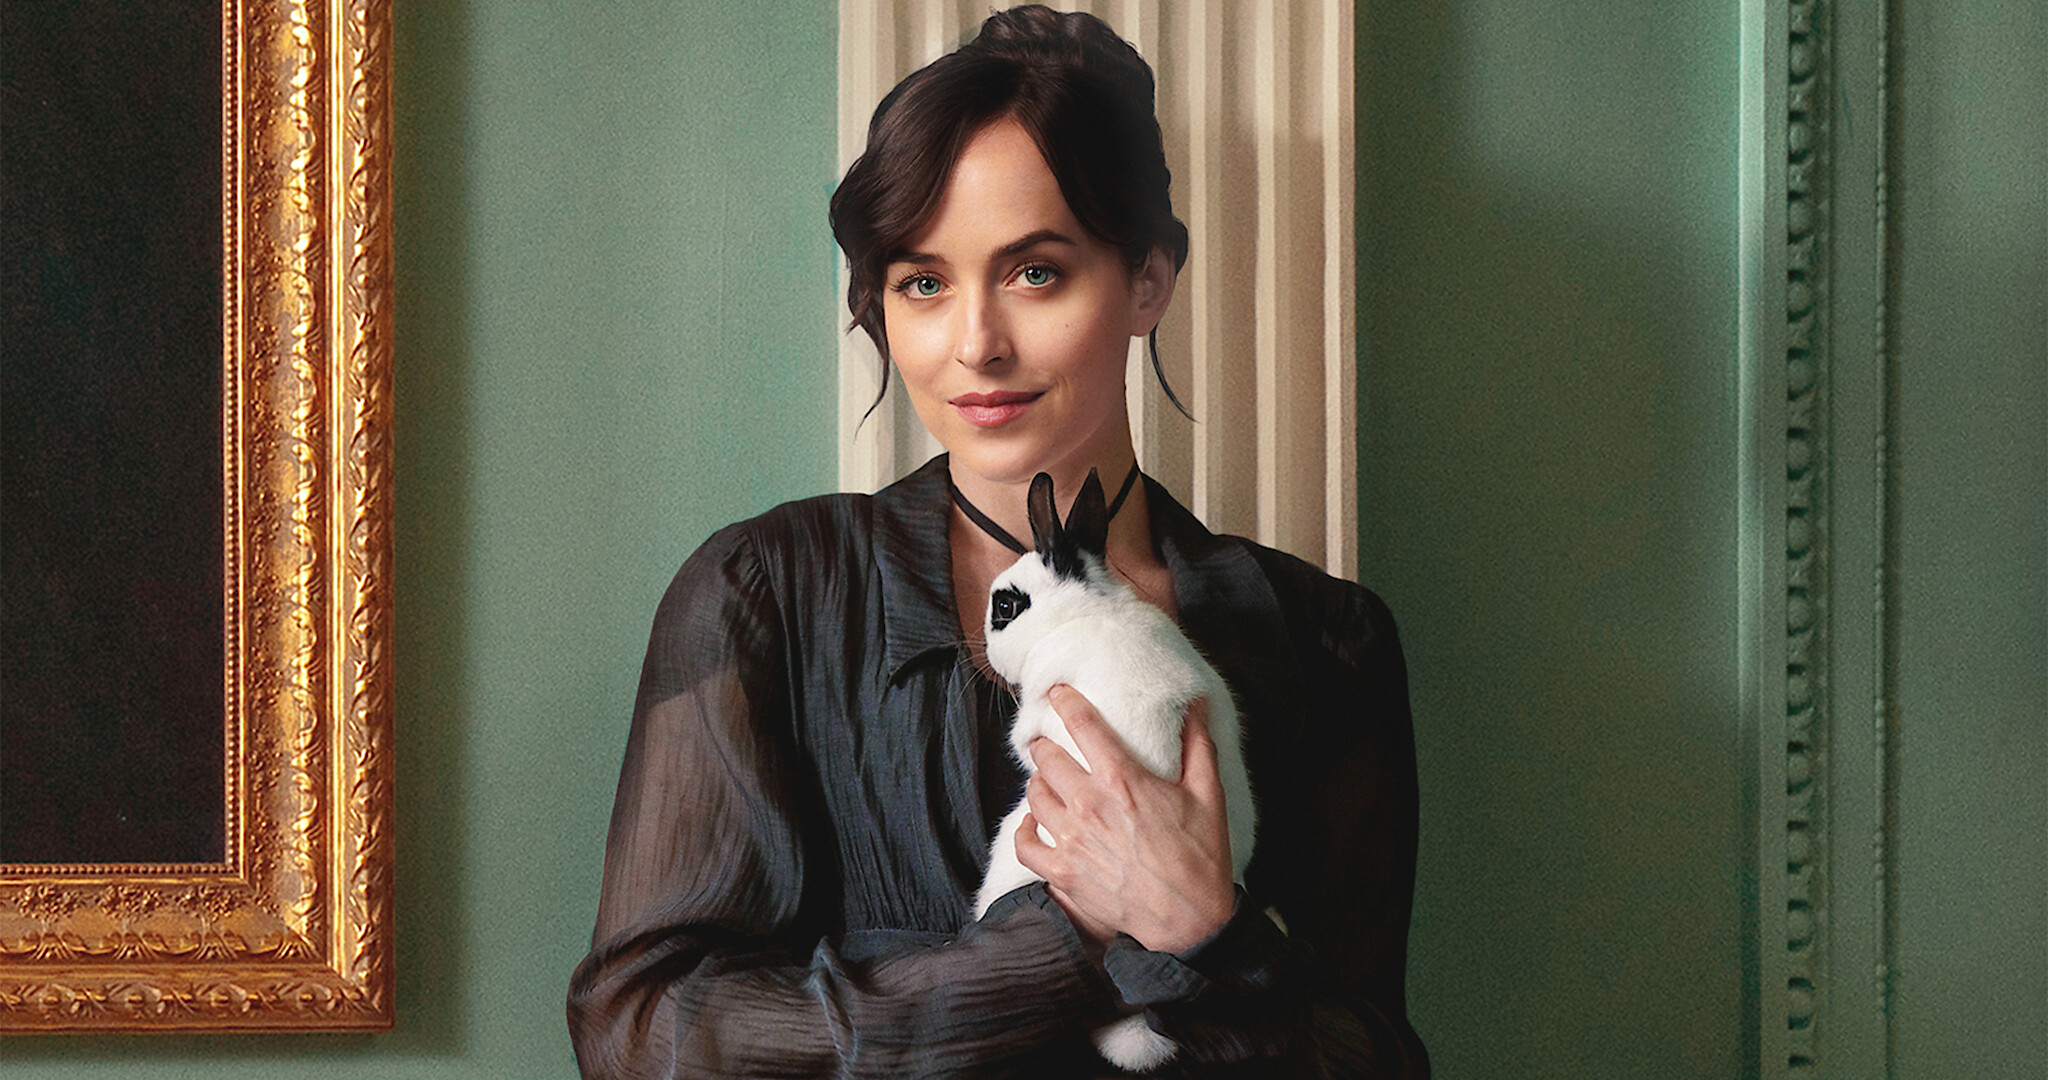 Check Out Dakota Johnson in New Persuasion Character Poster